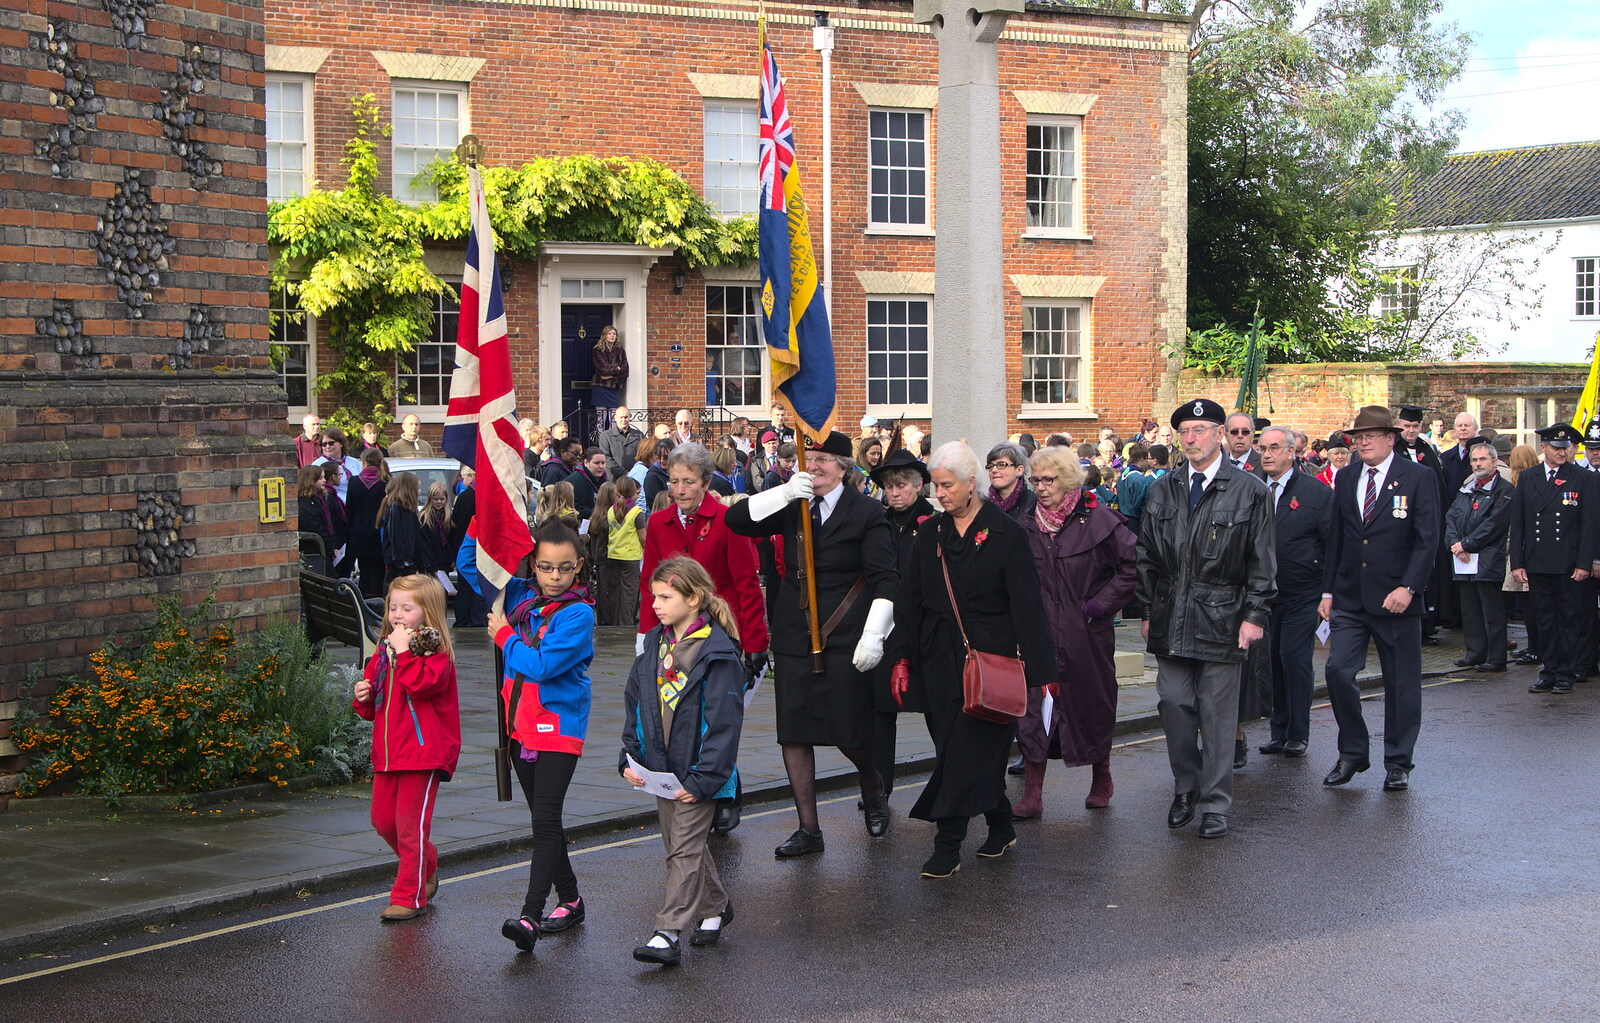 The parade continues on towards the church from A Remembrance Sunday Parade, Eye, Suffolk - 9th November 2014